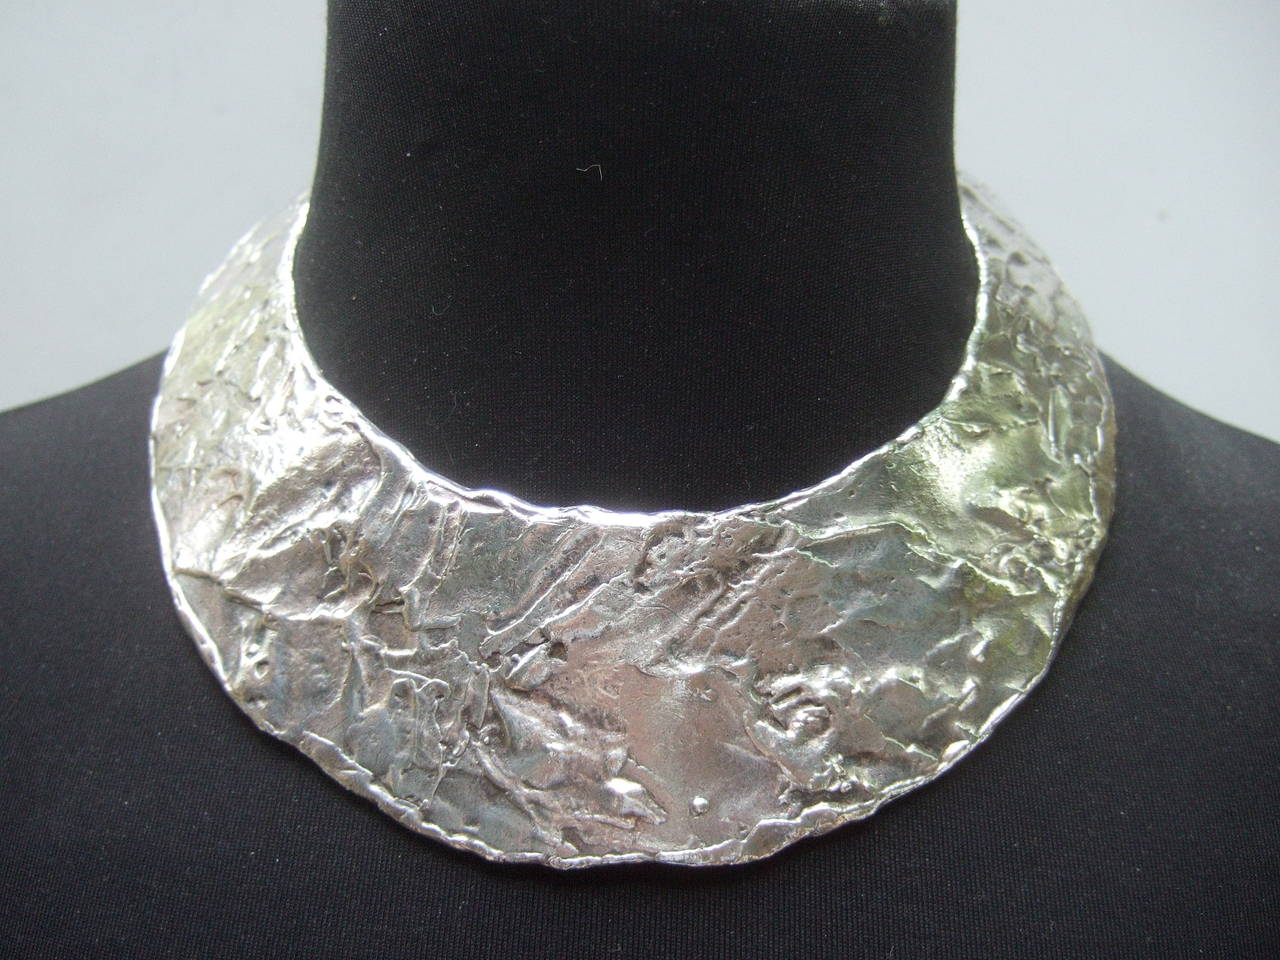 ***RESERVED FOR WENDY SALE PENDING***

Biche de Bere Paris Modernist style hammered metal collar necklace c 1990
The severe bold avant-garde necklace is designed with a textured 
abstract finish. The brutalist style silver metal collar necklace